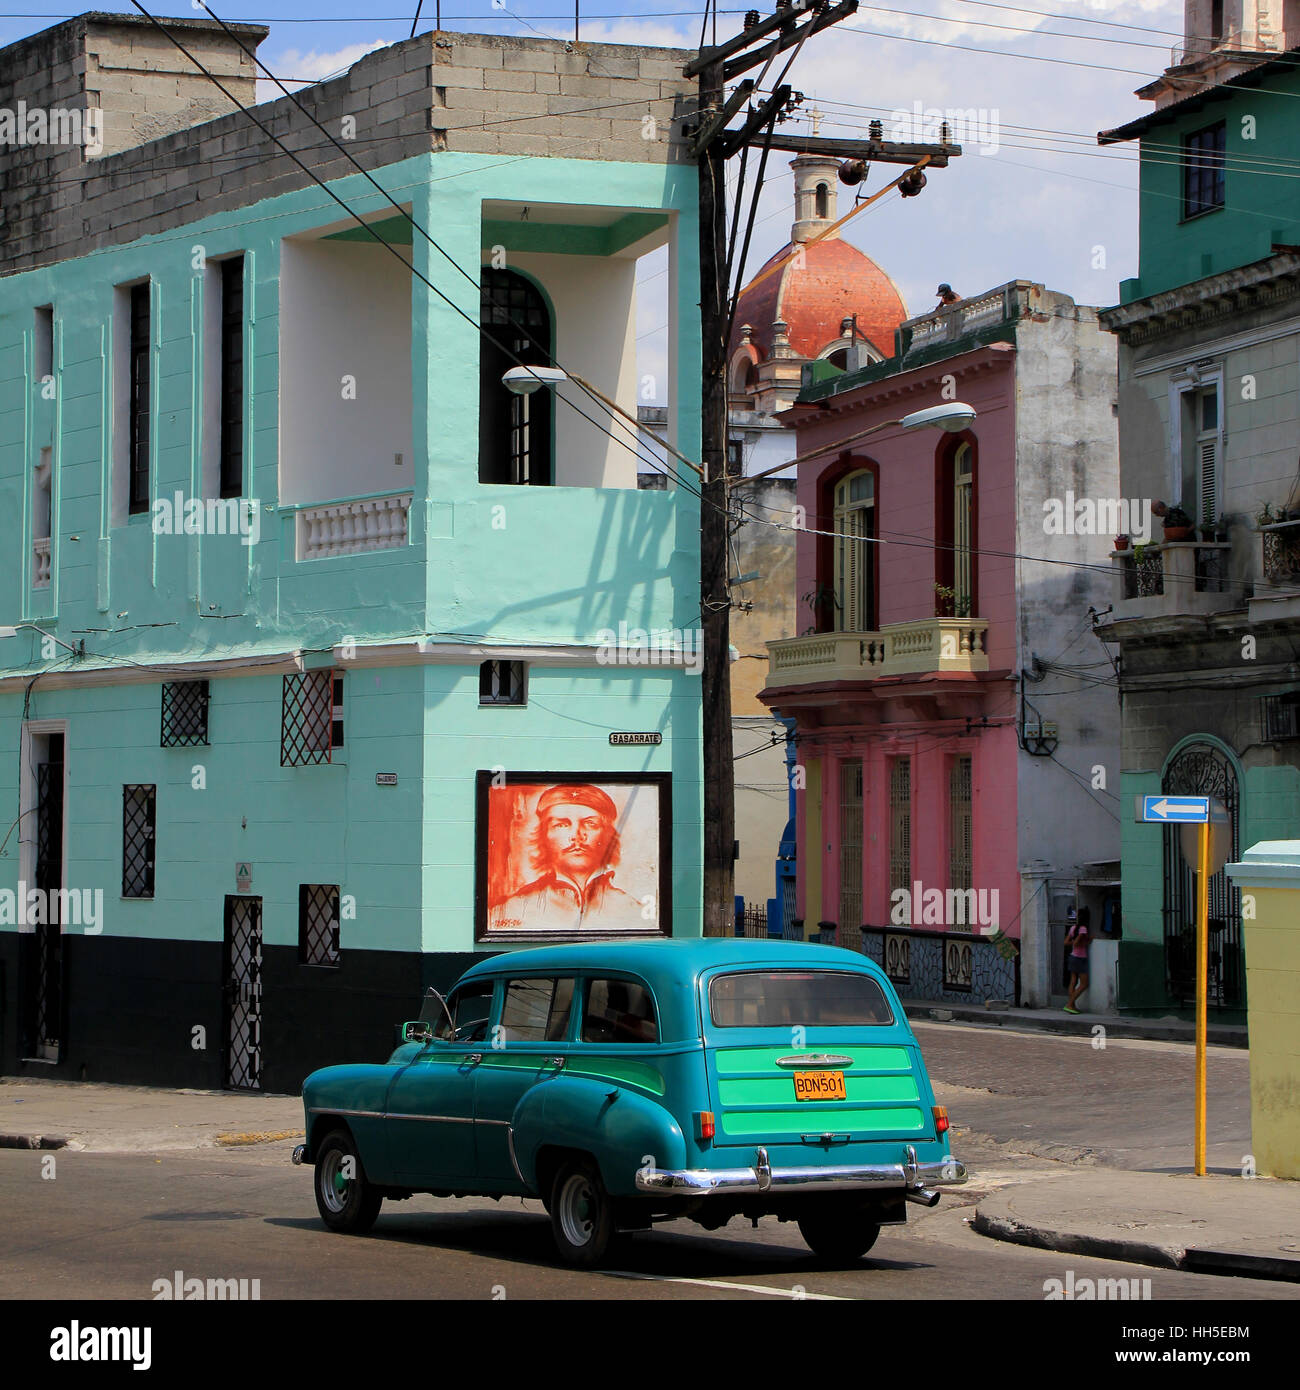 Art In Havana High Resolution Stock Photography and Images -